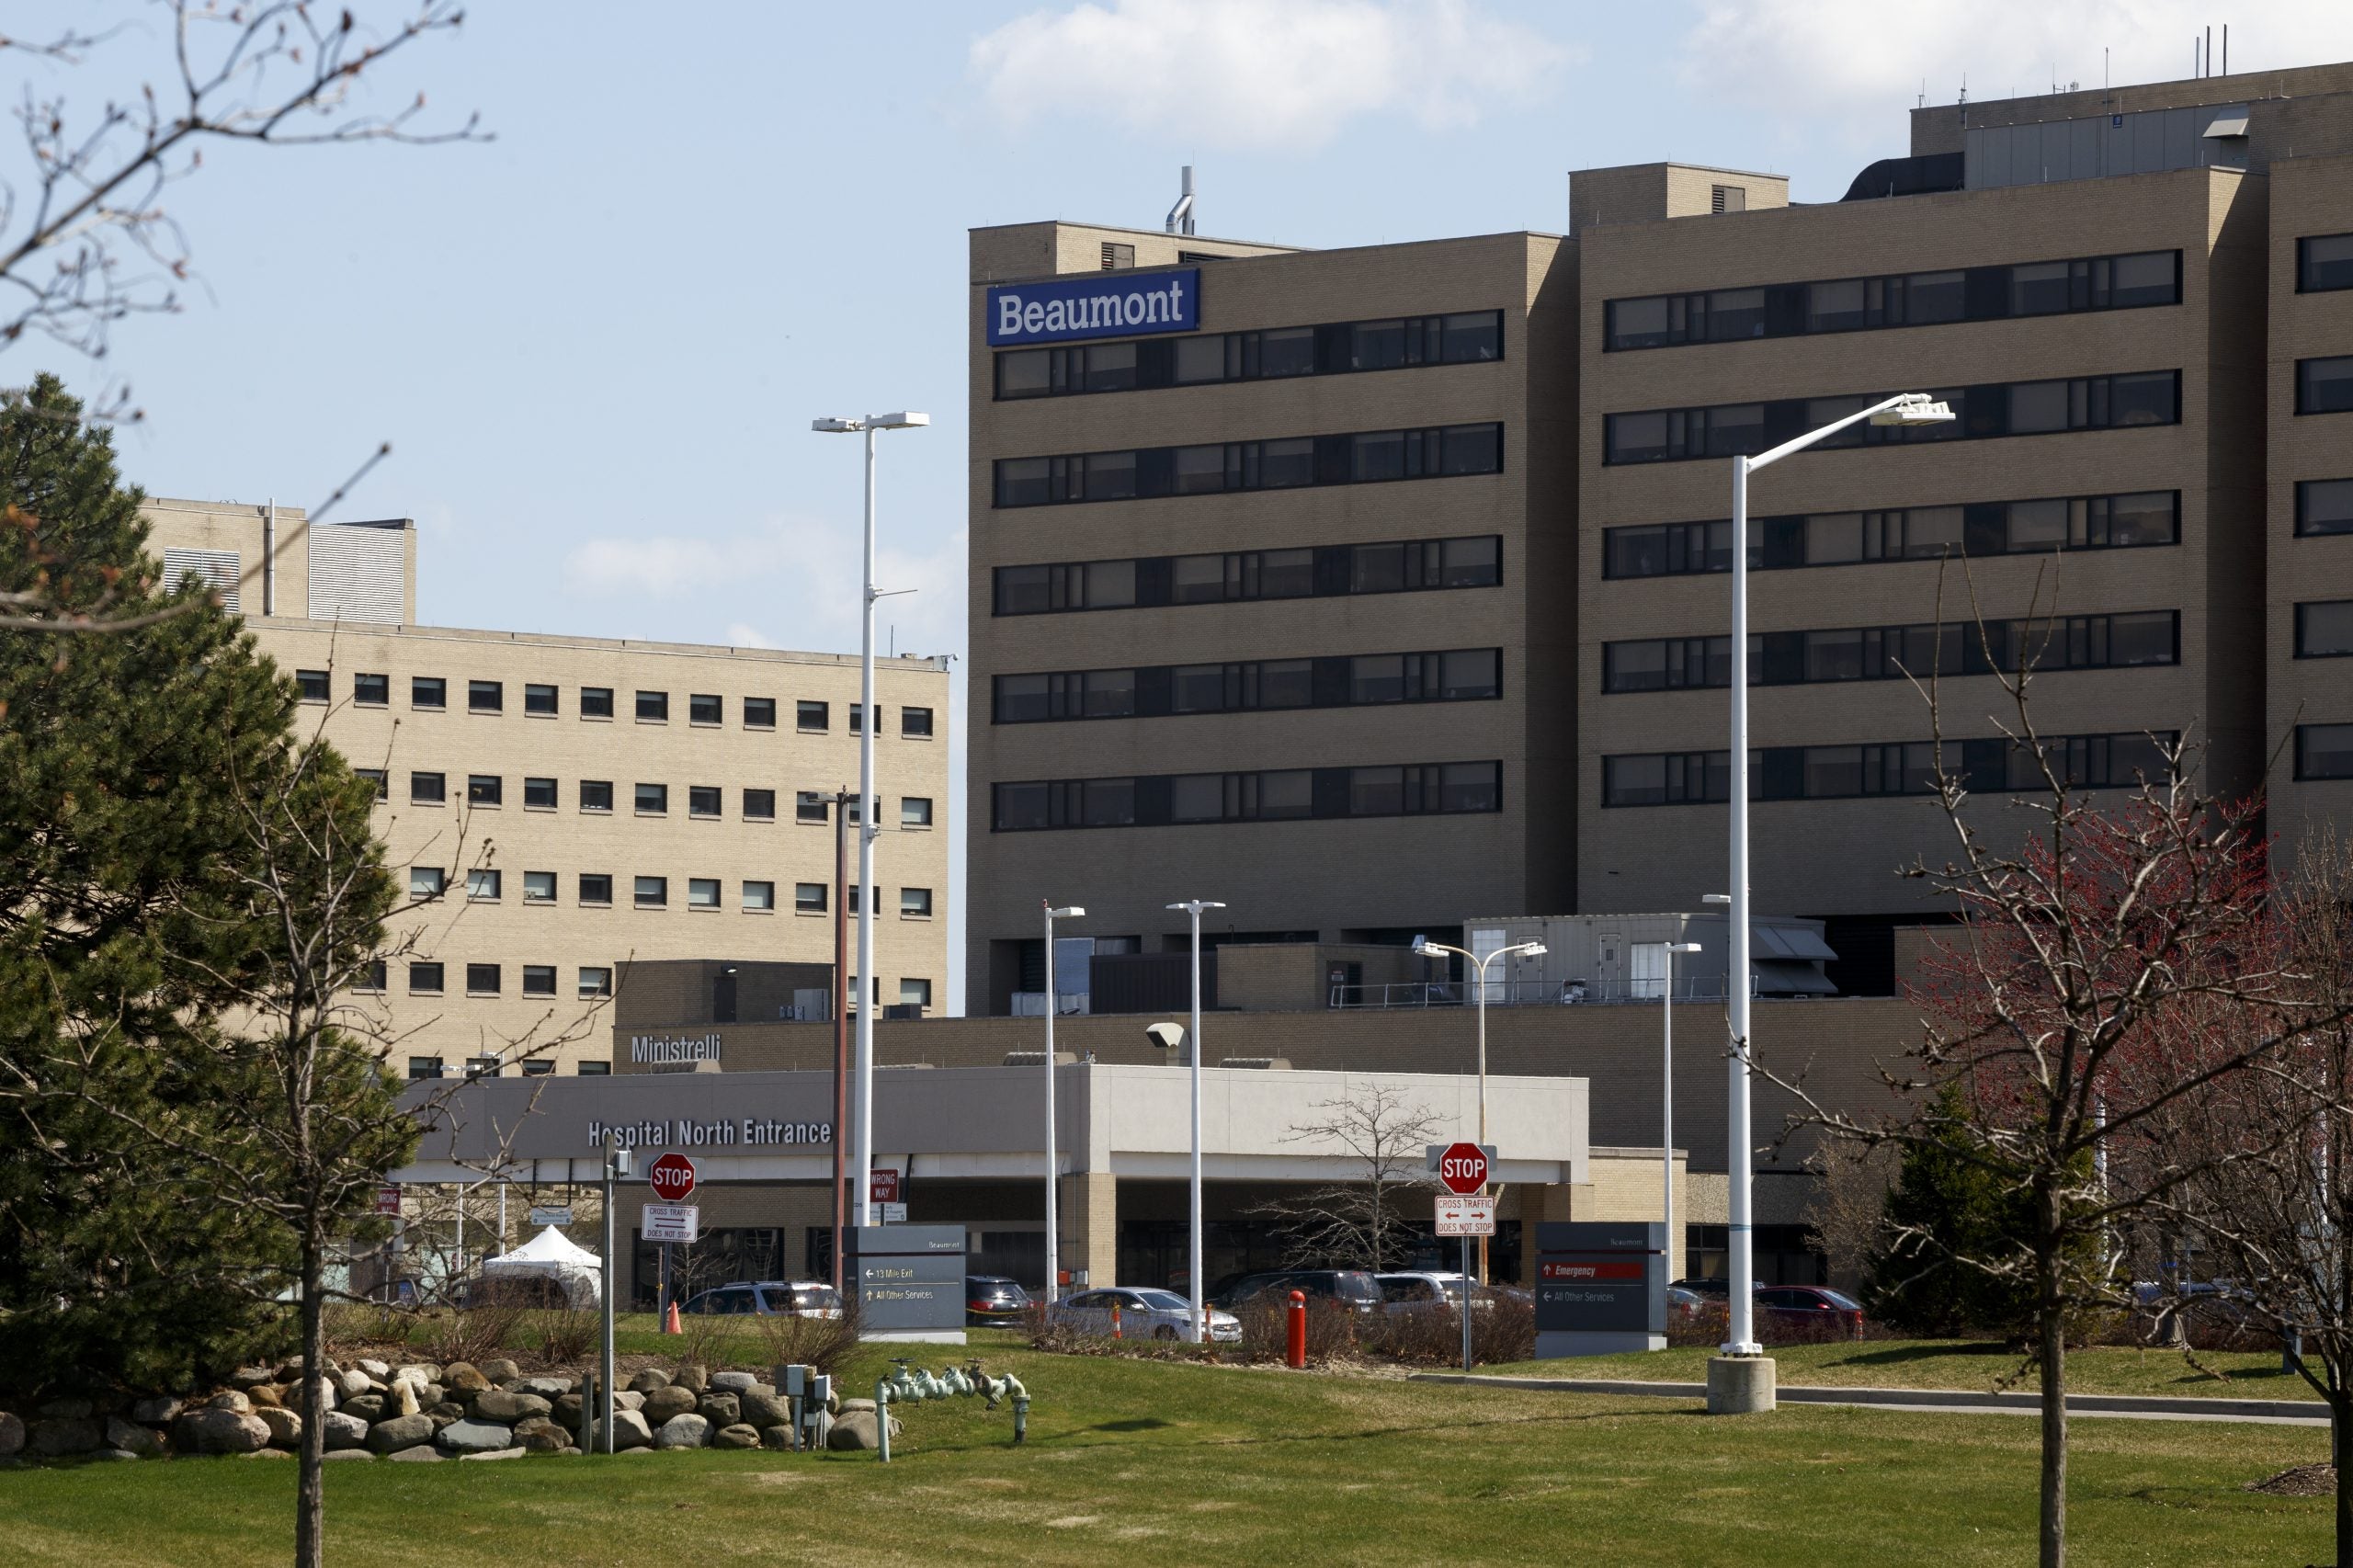 Michigan Woman Dies After Hospital Where She Worked Denied Her Coronavirus Test 4 Times